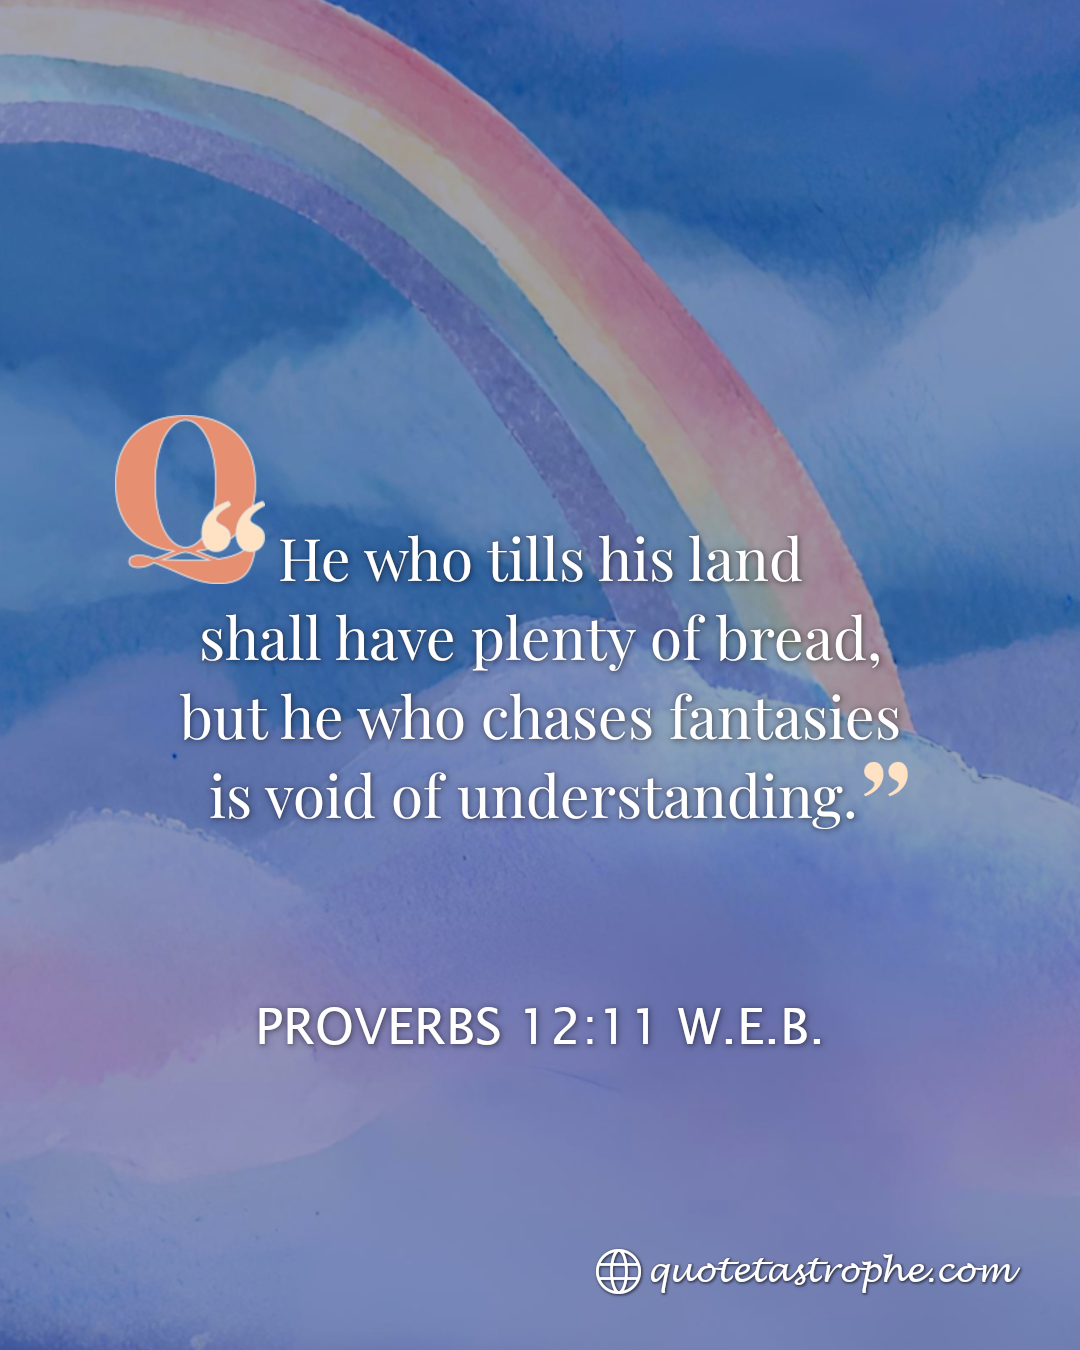 Proverbs 12:11 Bible Quotes Images For You